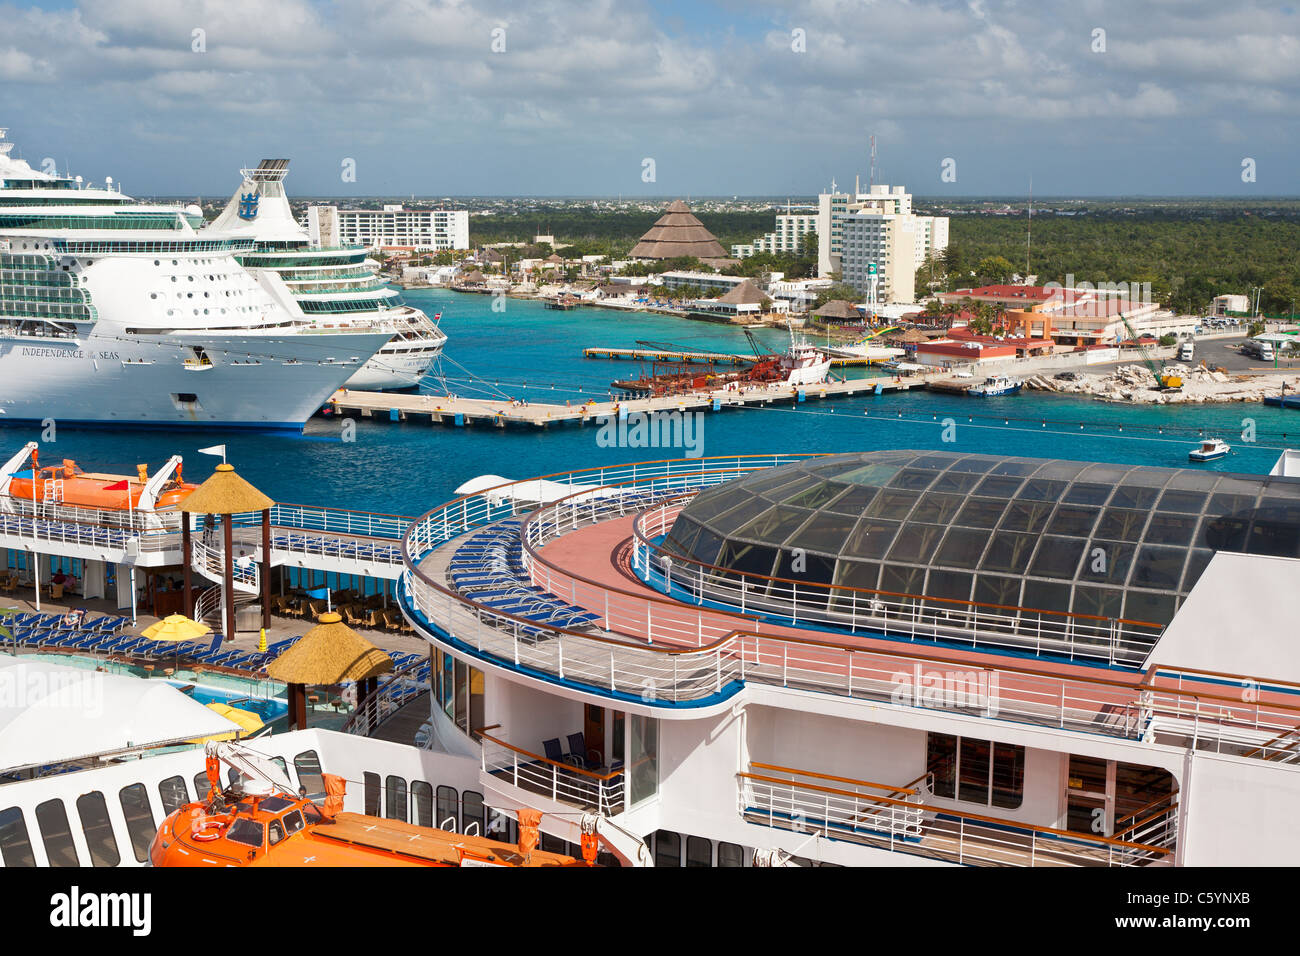 Carnival Ecstasy and two Royal Caribbean cruise ships at port in Cozumel, Mexico in the Caribbean Sea Stock Photo